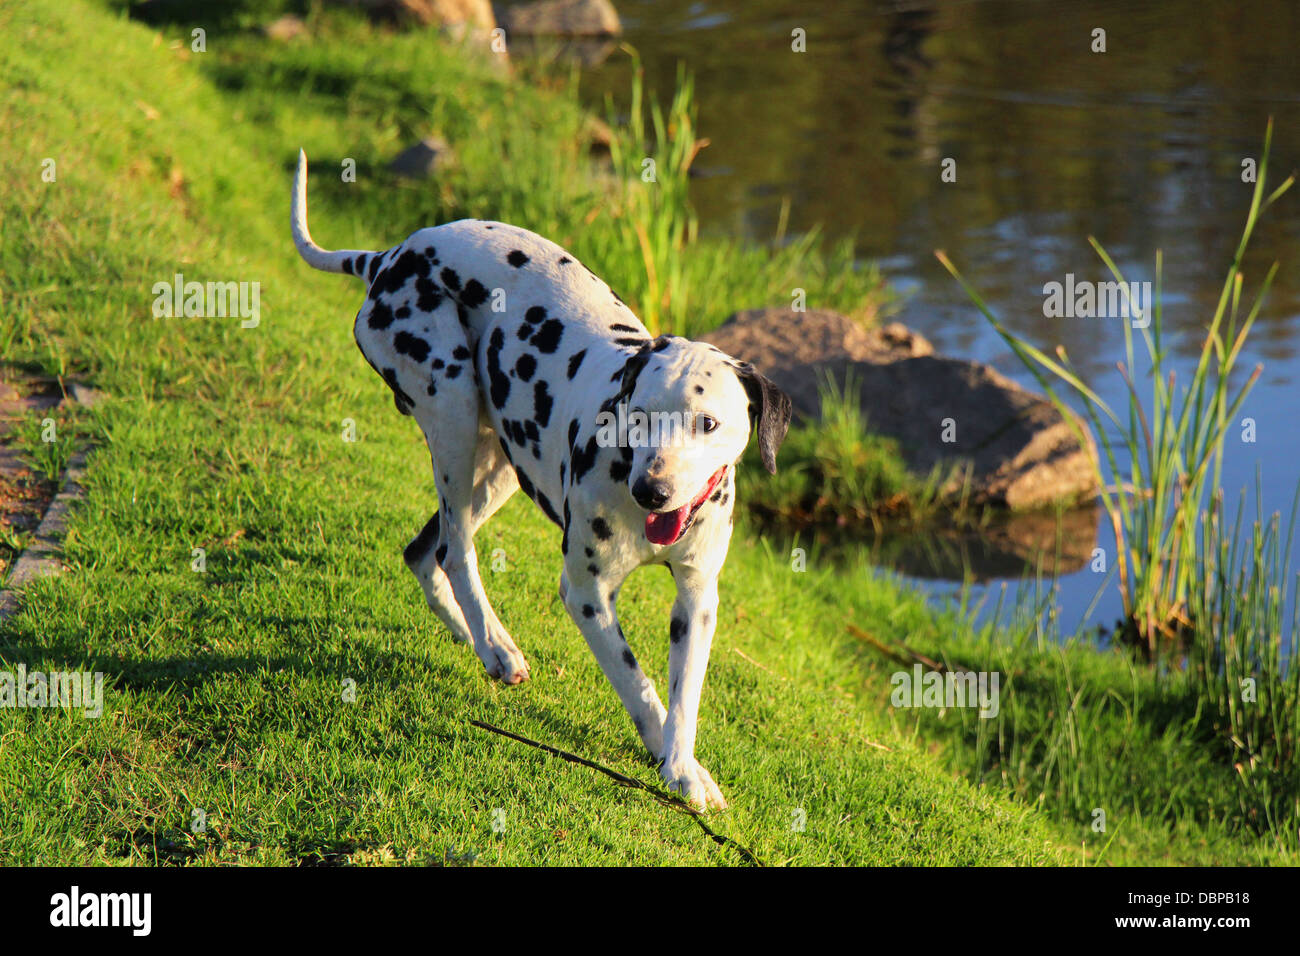 Curious Dalmatian returns from exploring the waters edge at a park dam Stock Photo